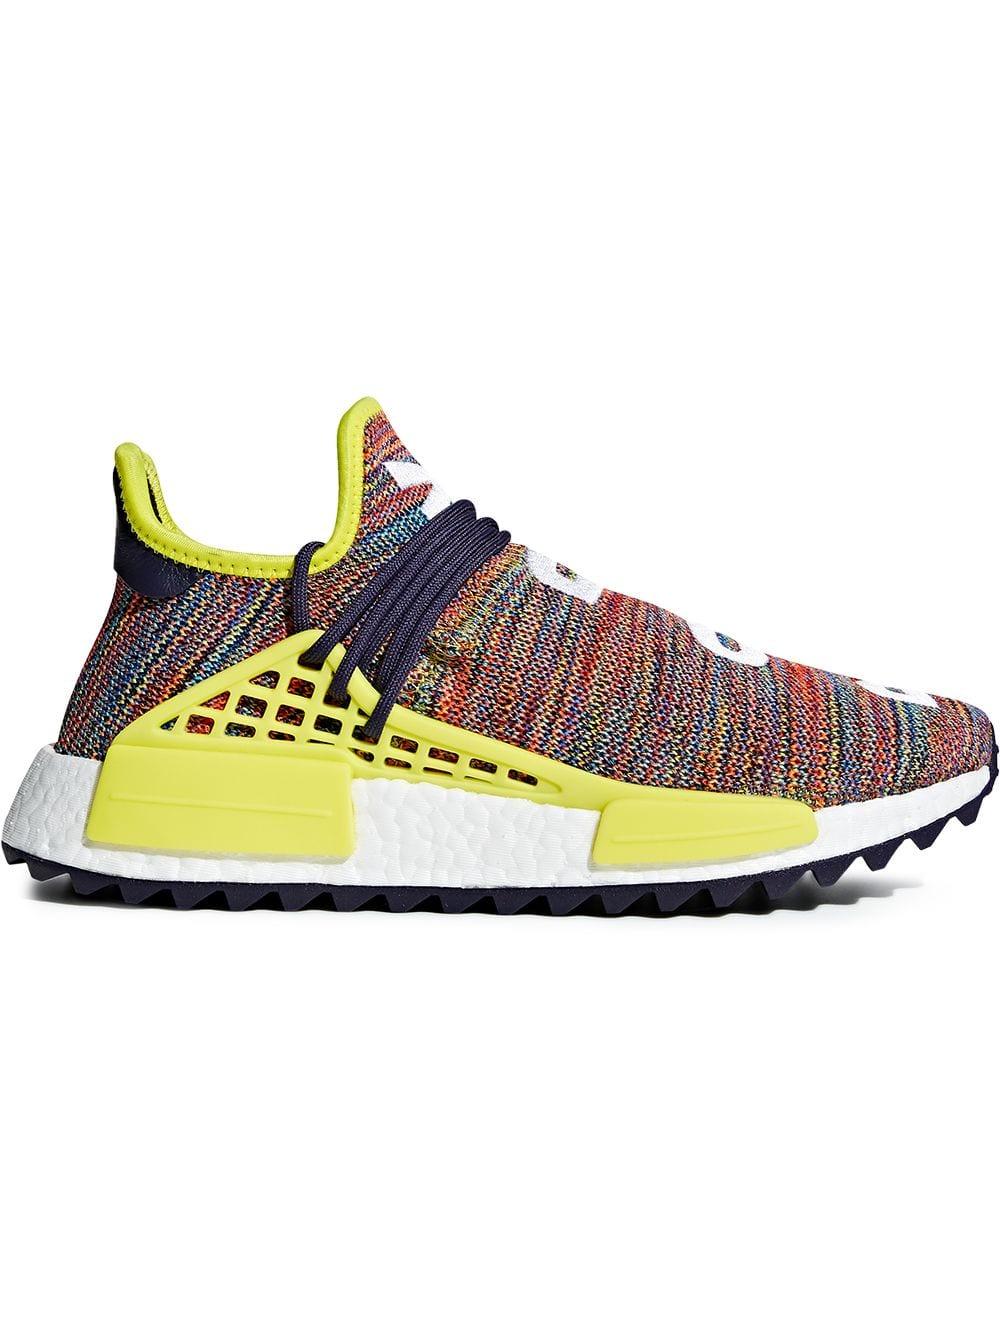 adidas X Pharrell Williams Human Race Body And Earth Nmd Sneakers for Men |  Lyst